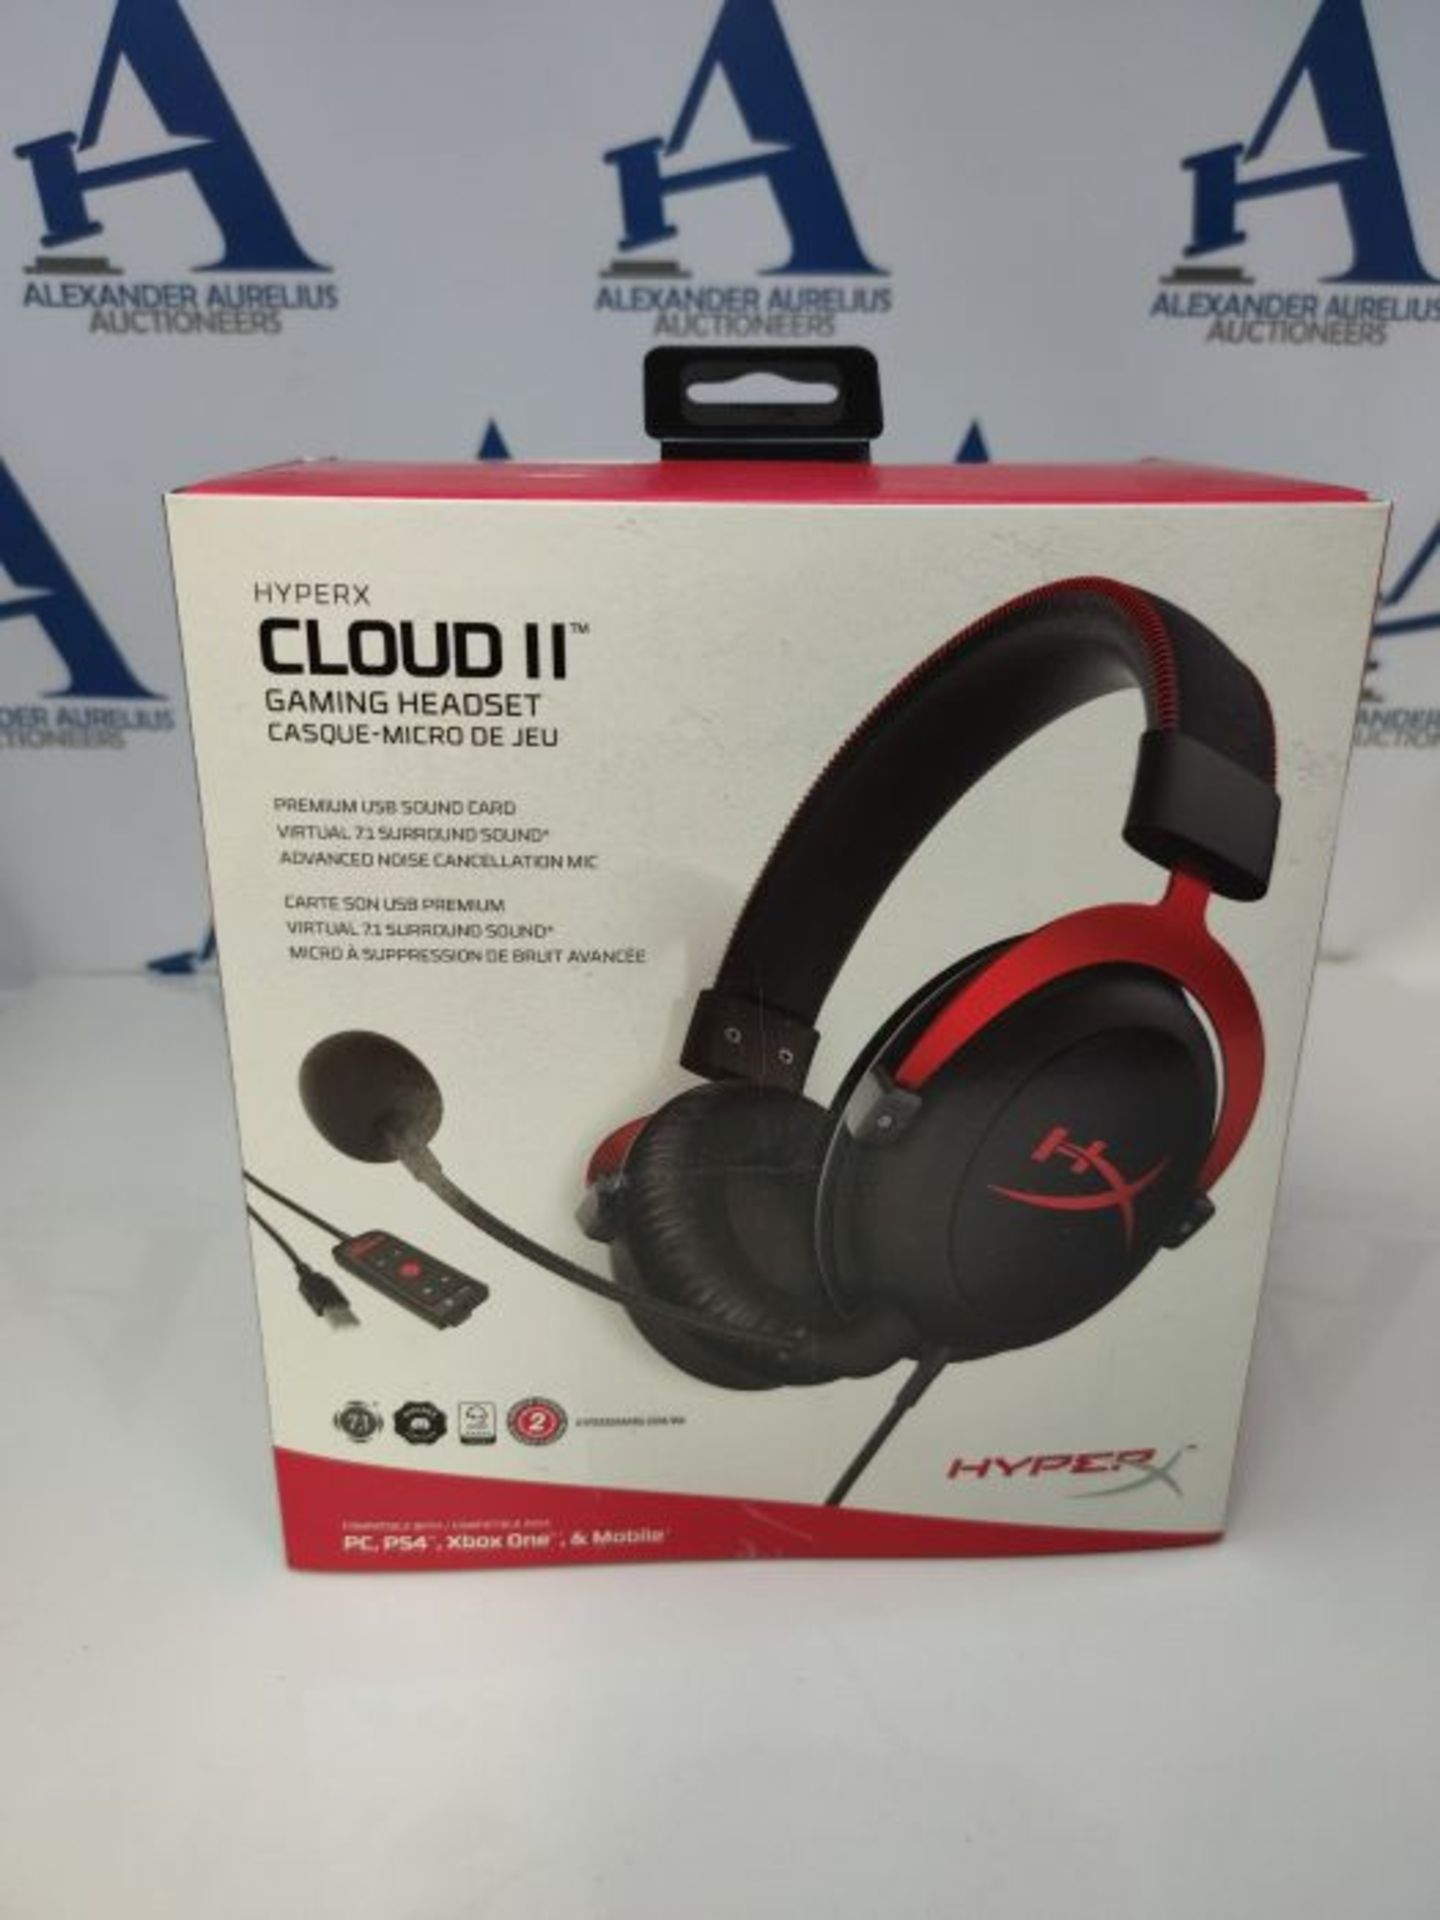 RRP £79.00 HyperX Cloud II 7.1 Virtual Surround Sound Gaming Headset with Advanced USB Audio Cont - Image 2 of 3